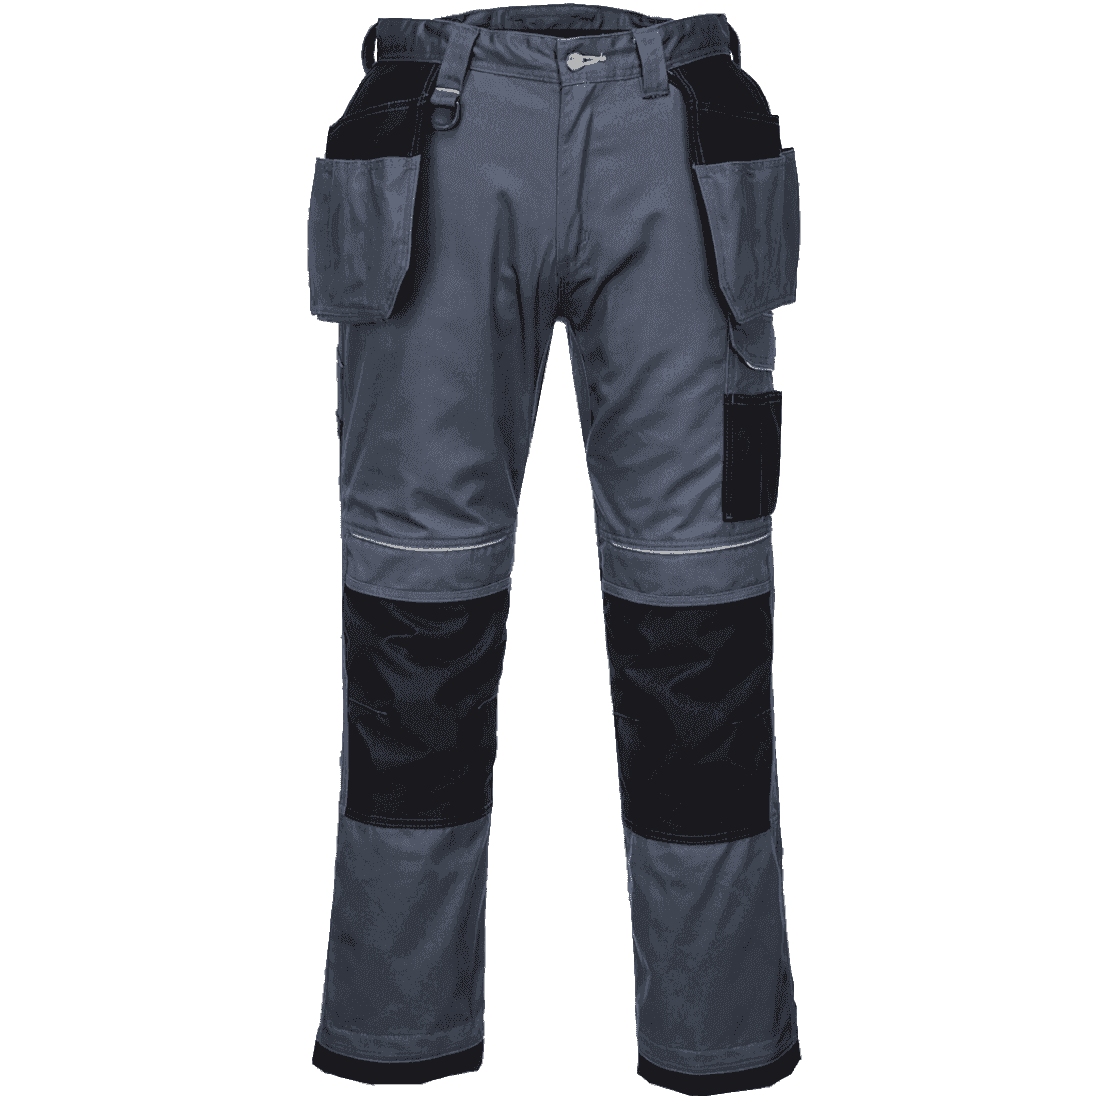 Holster Pocket Work Trousers T602 PW3 Grey/Black